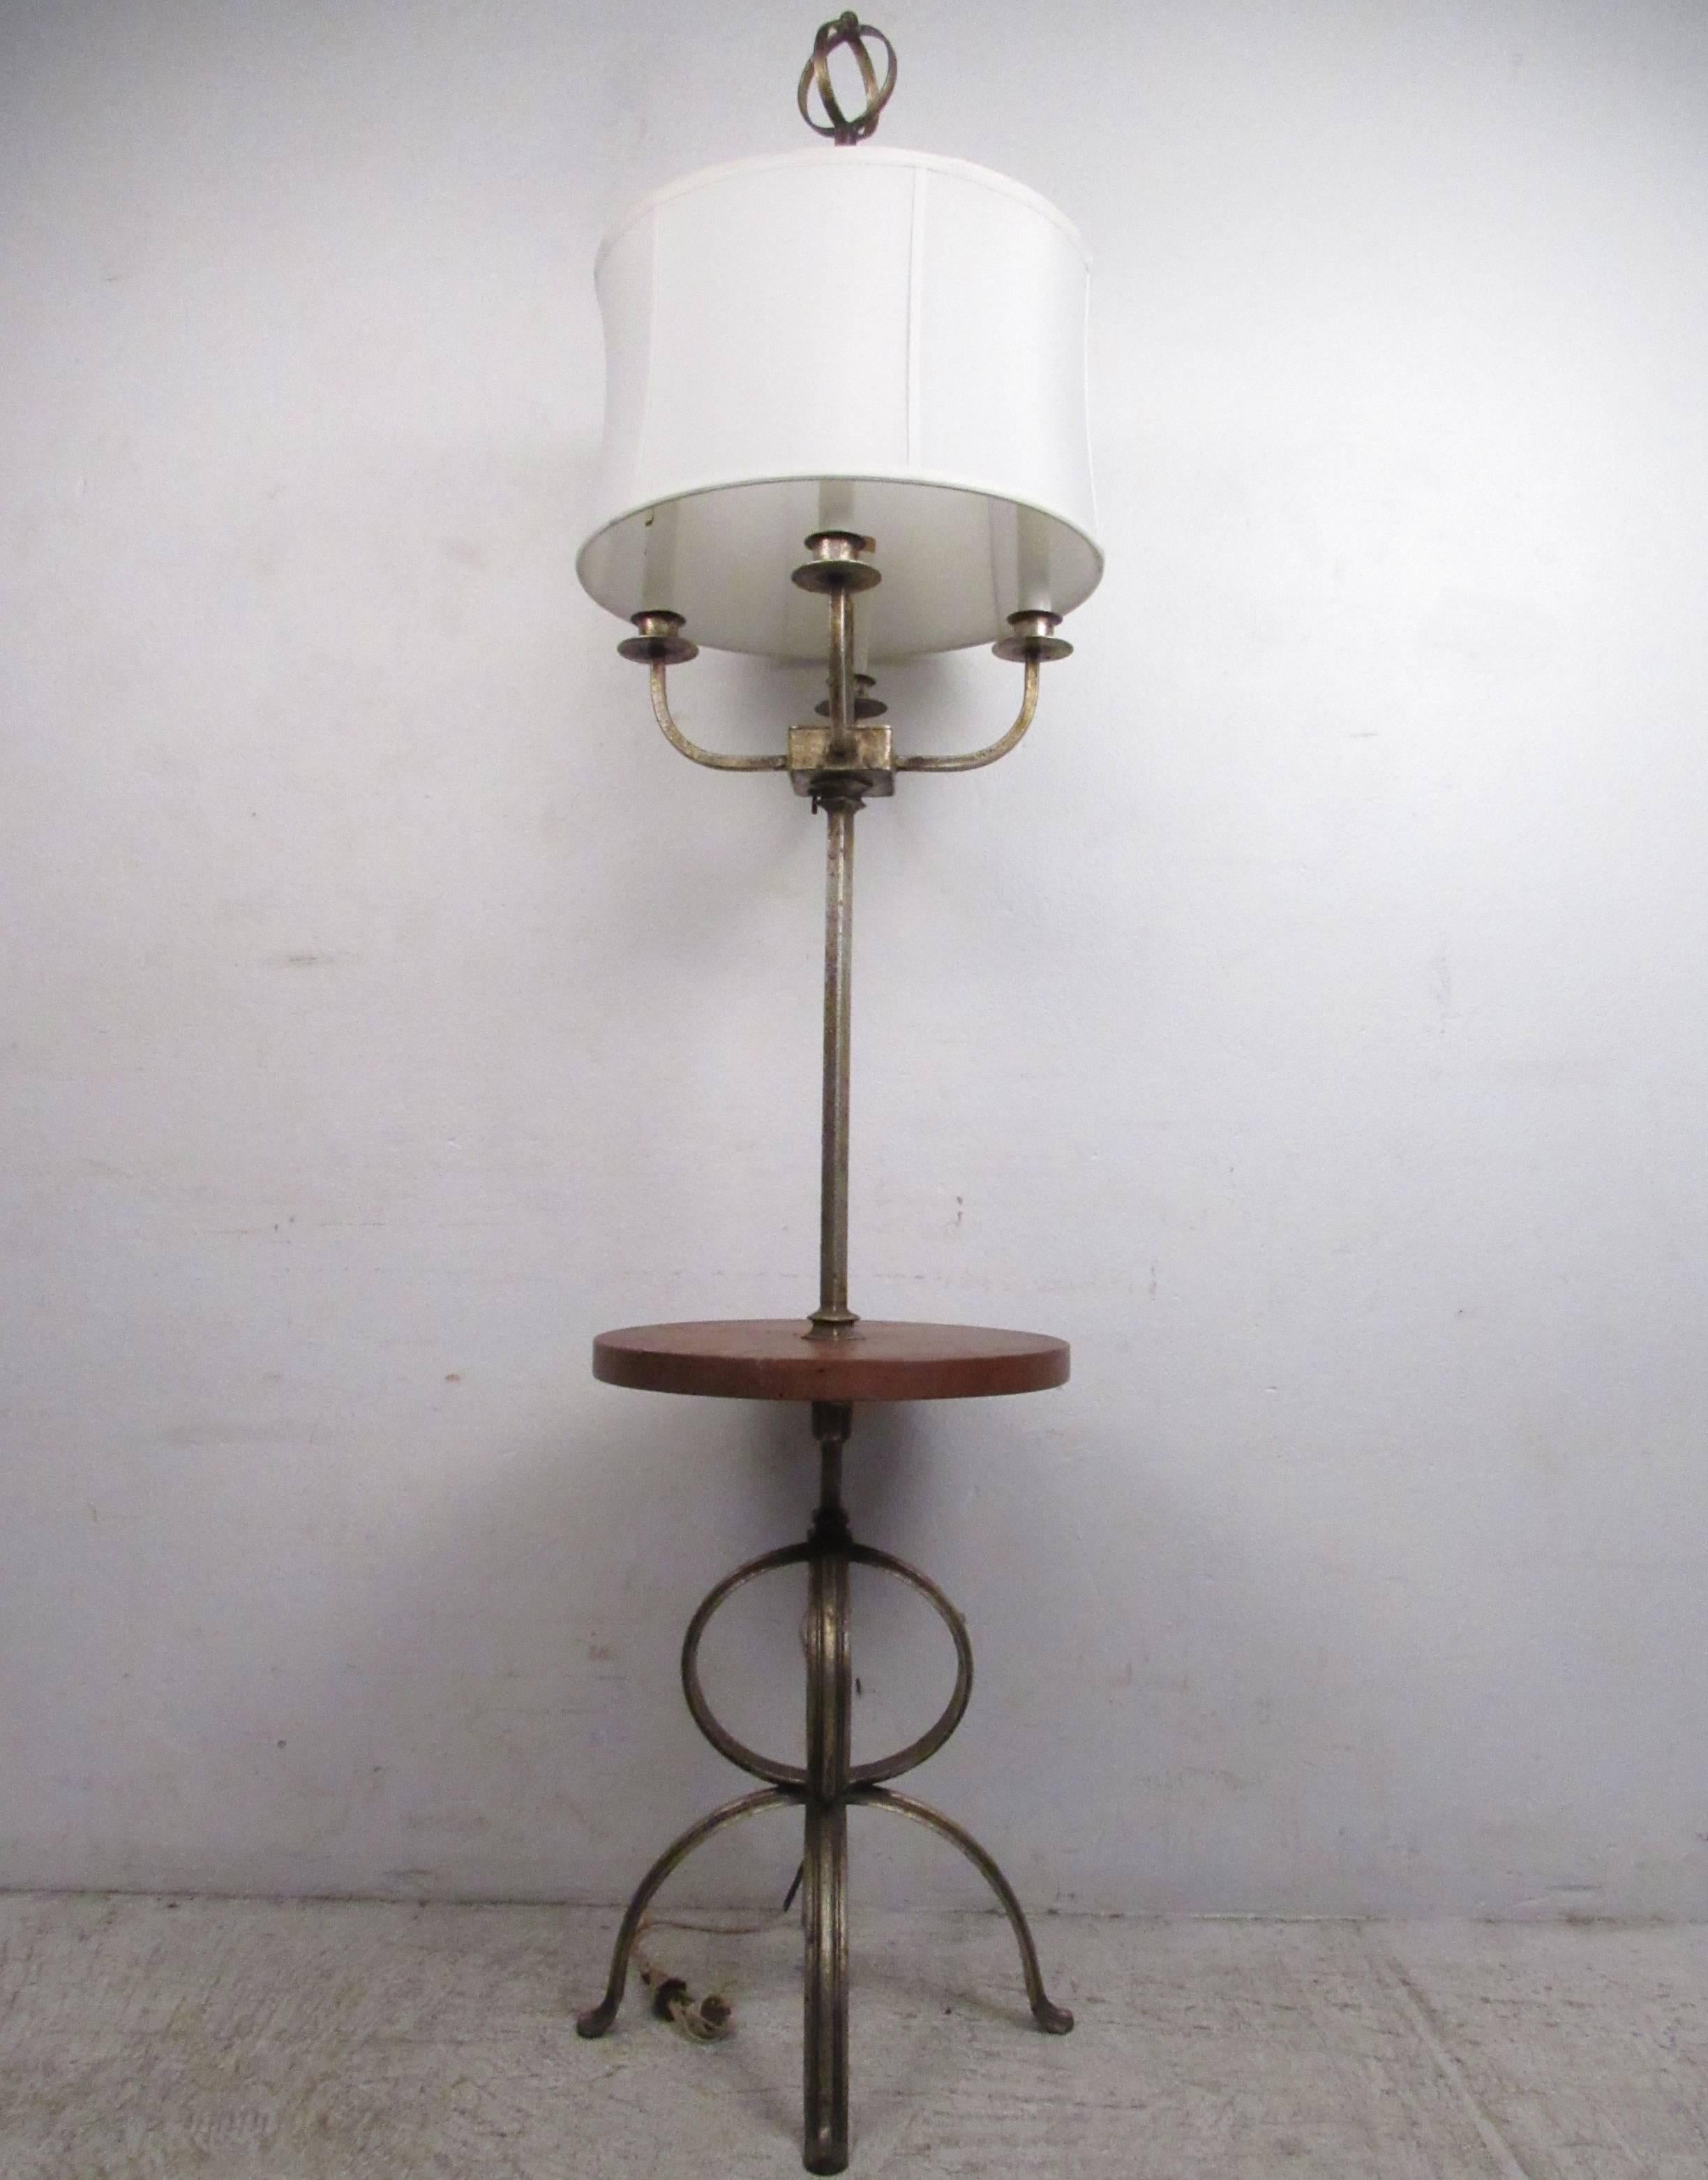 This unique vintage candelabra style lamp features sturdy metal construction and a unique wooden table top. Vintage finish is complimented by original design details. Please confirm item location (NY or NJ).